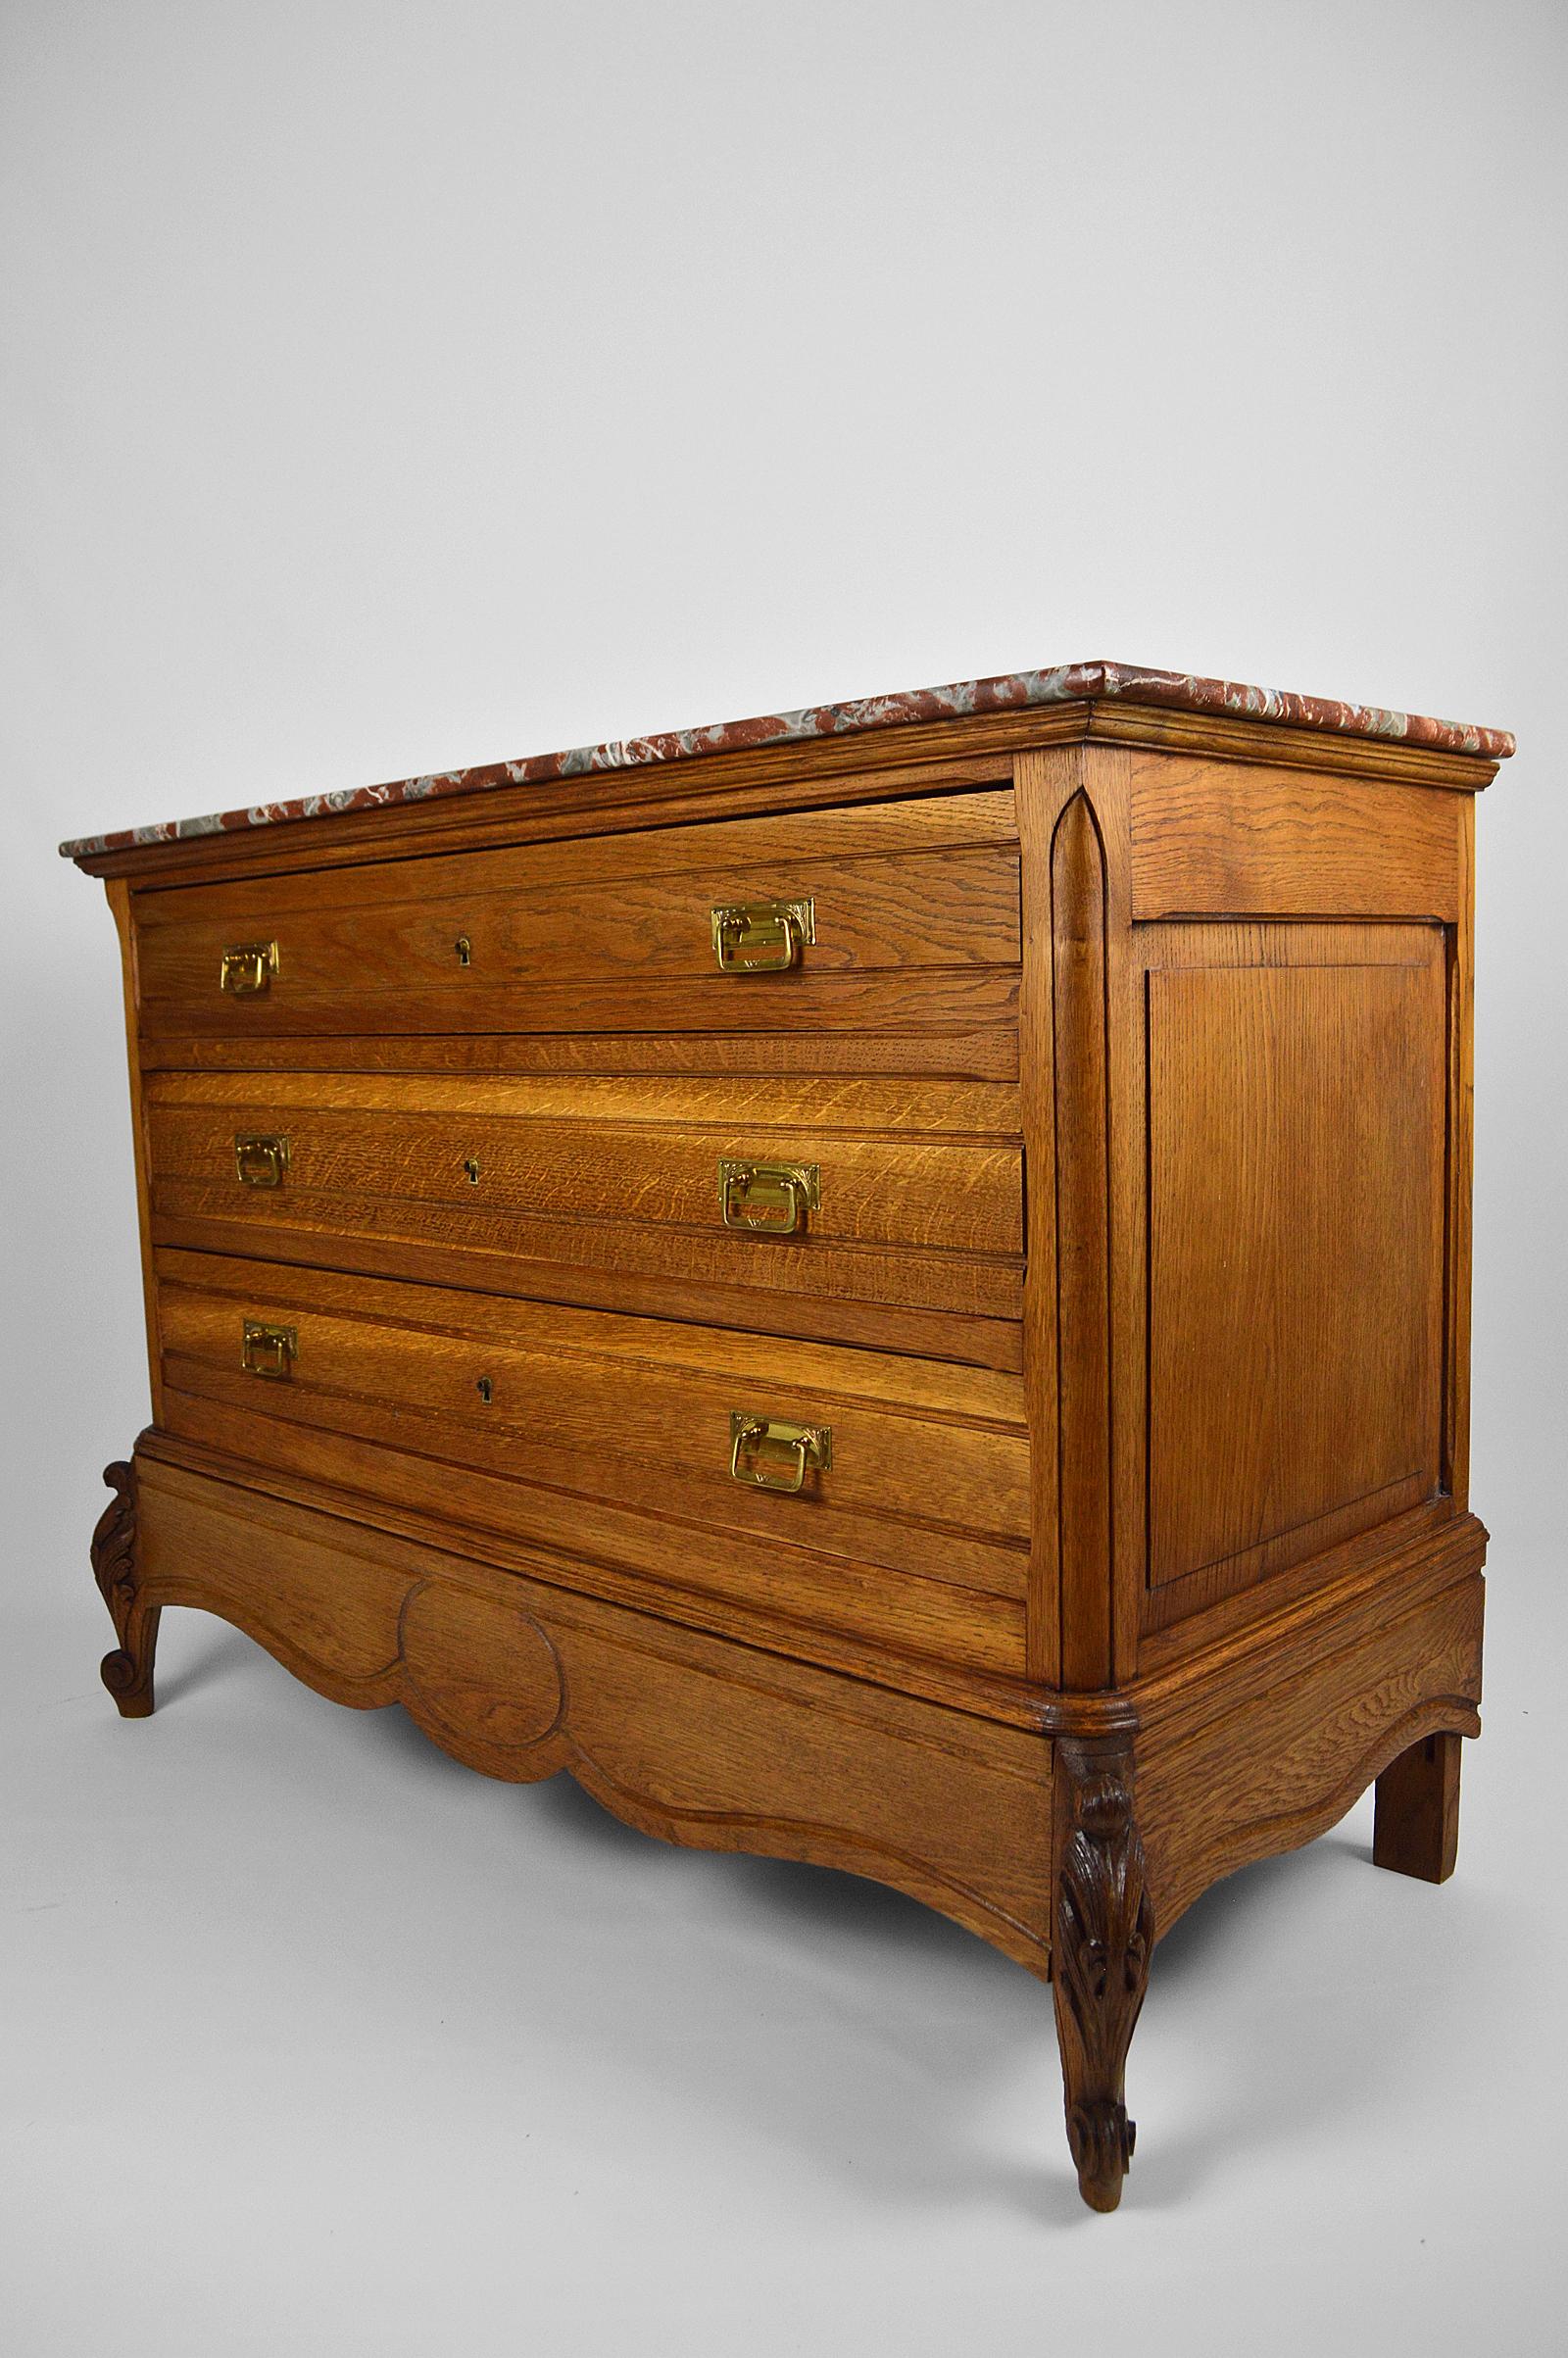 Superb eclectic Belle Époque / Rococo / Art Nouveau chest of drawers.
In solid carved oak with red marble top and brass handles.
It has 4 drawers including 1 “secret” drawer.
Keys present, locks in working order.

France, circa 1910.

In superb